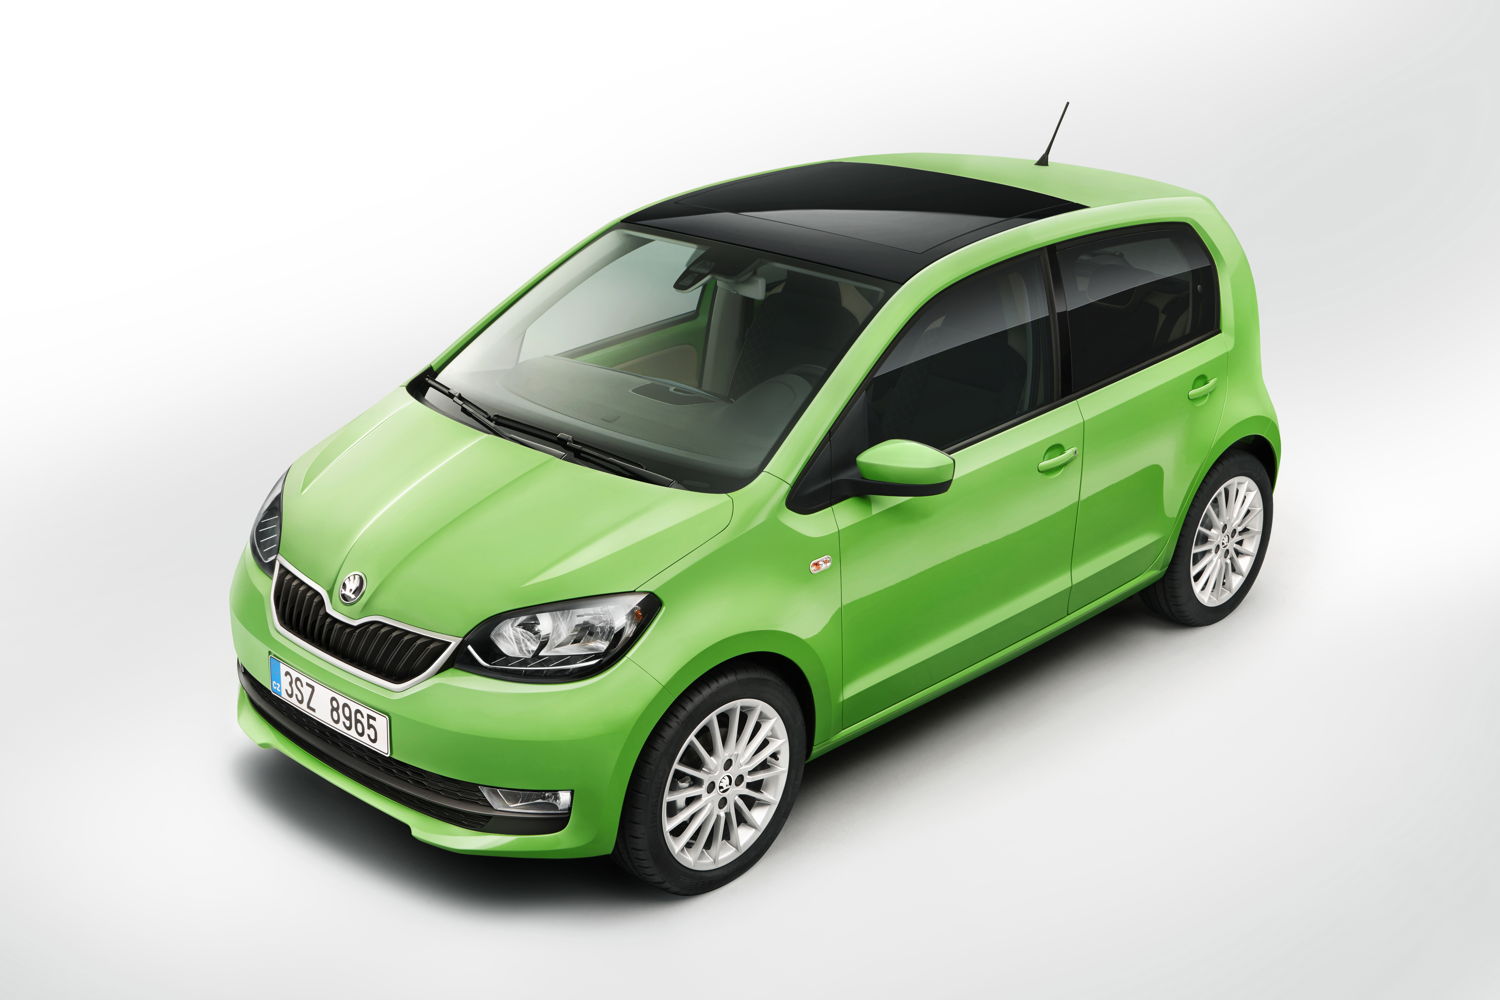 The newly designed 15-inch alloy wheels and the Kiwi Green body colour contribute to the new, fresh look.